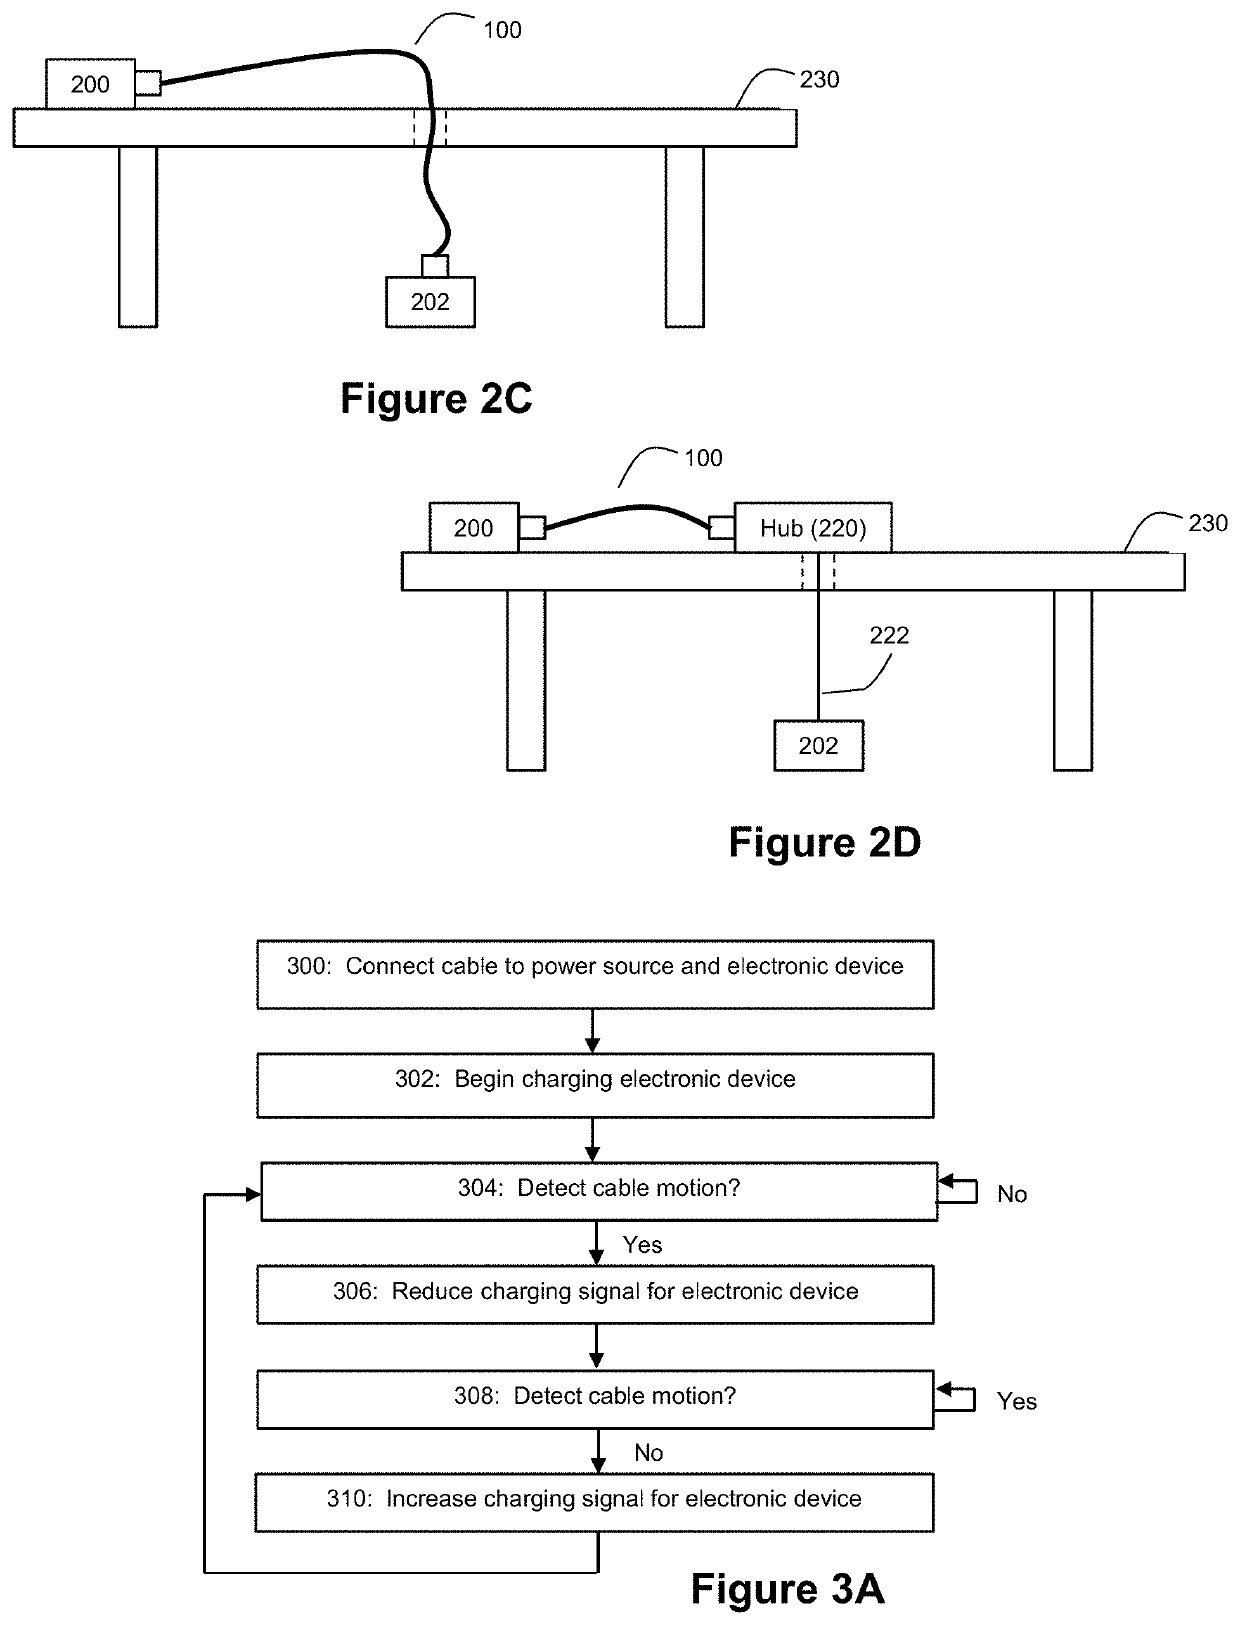 Motion sensing cable for tracking customer interaction with devices